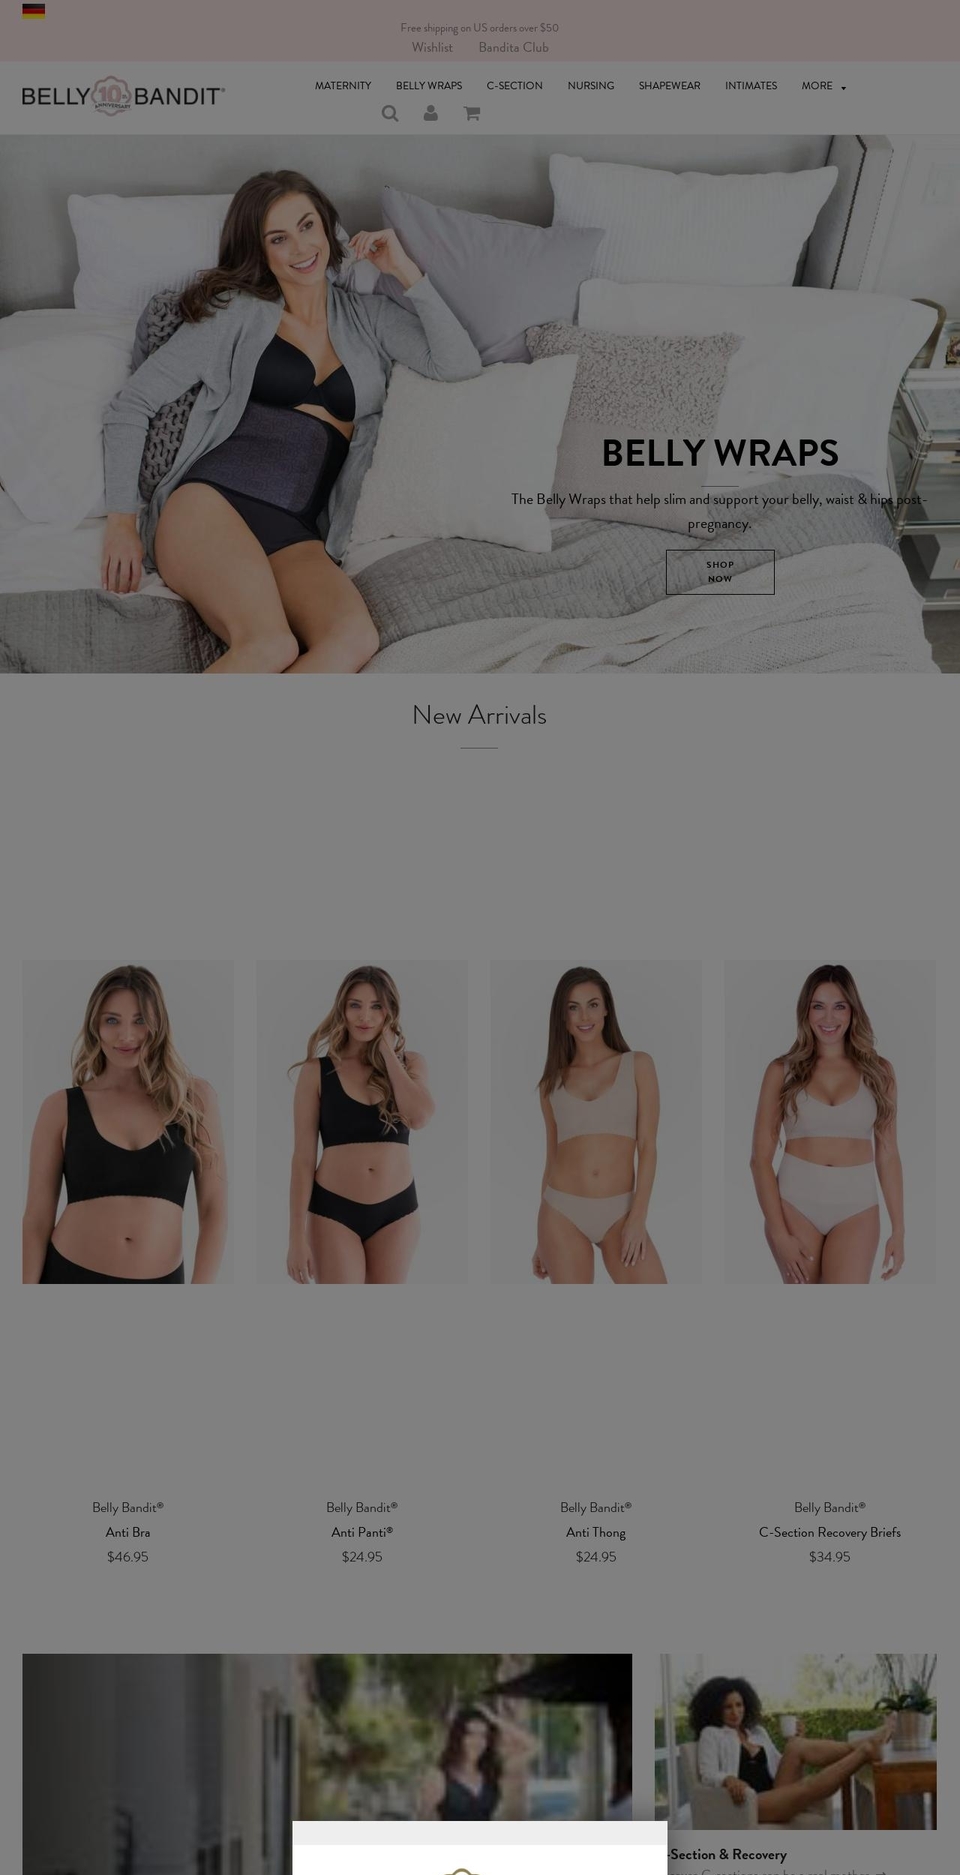 Copy of Flow Shopify theme site example bellybandit.com